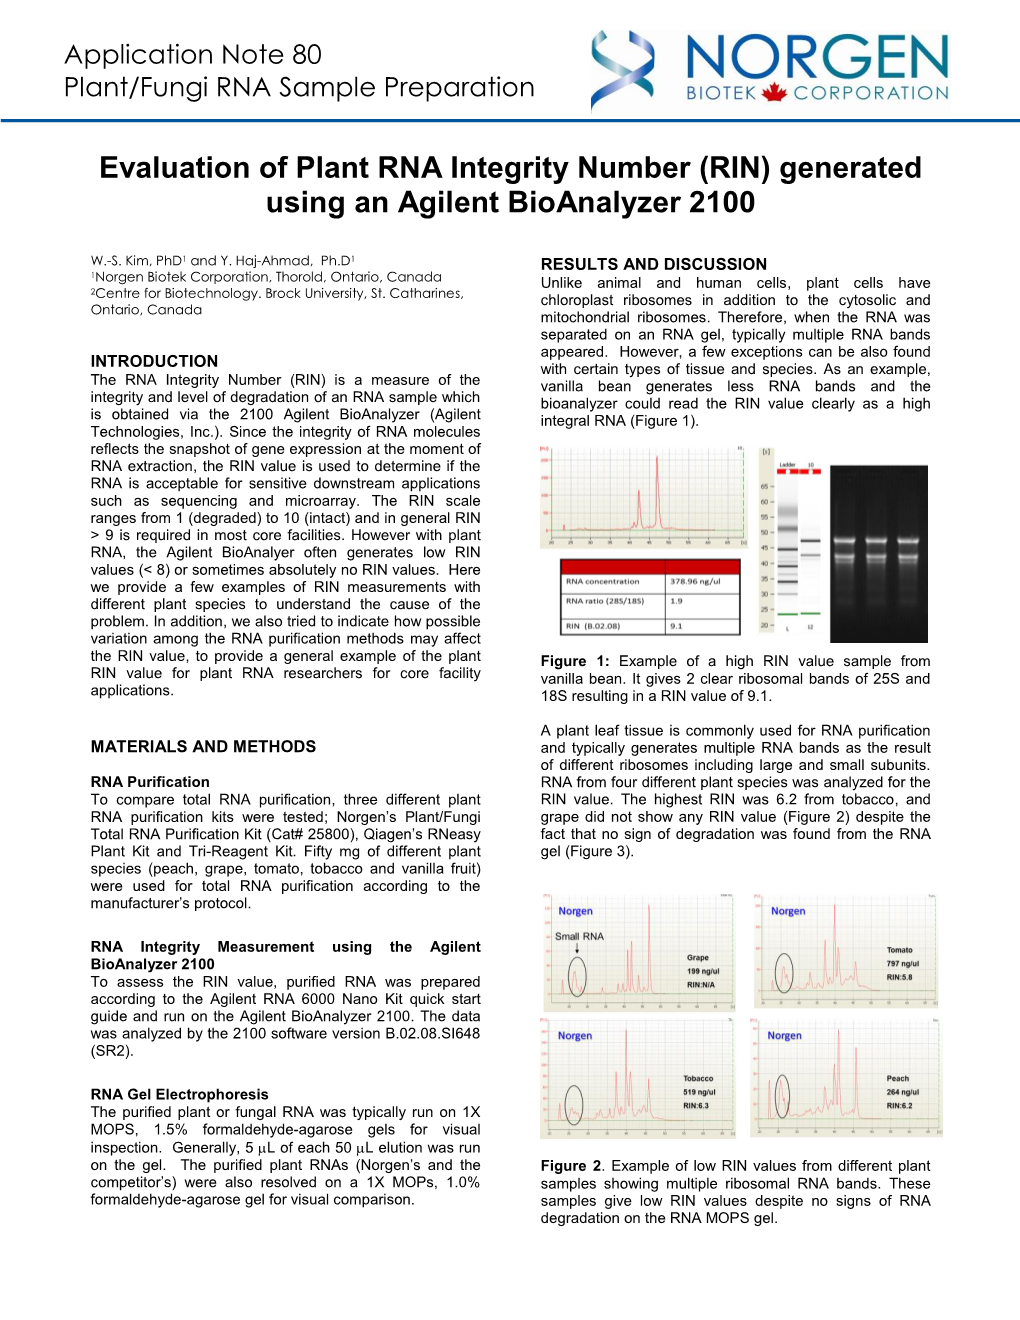 Evaluation of Plant RNA Integrity Number (RIN) Generated Using an Agilent Bioanalyzer 2100